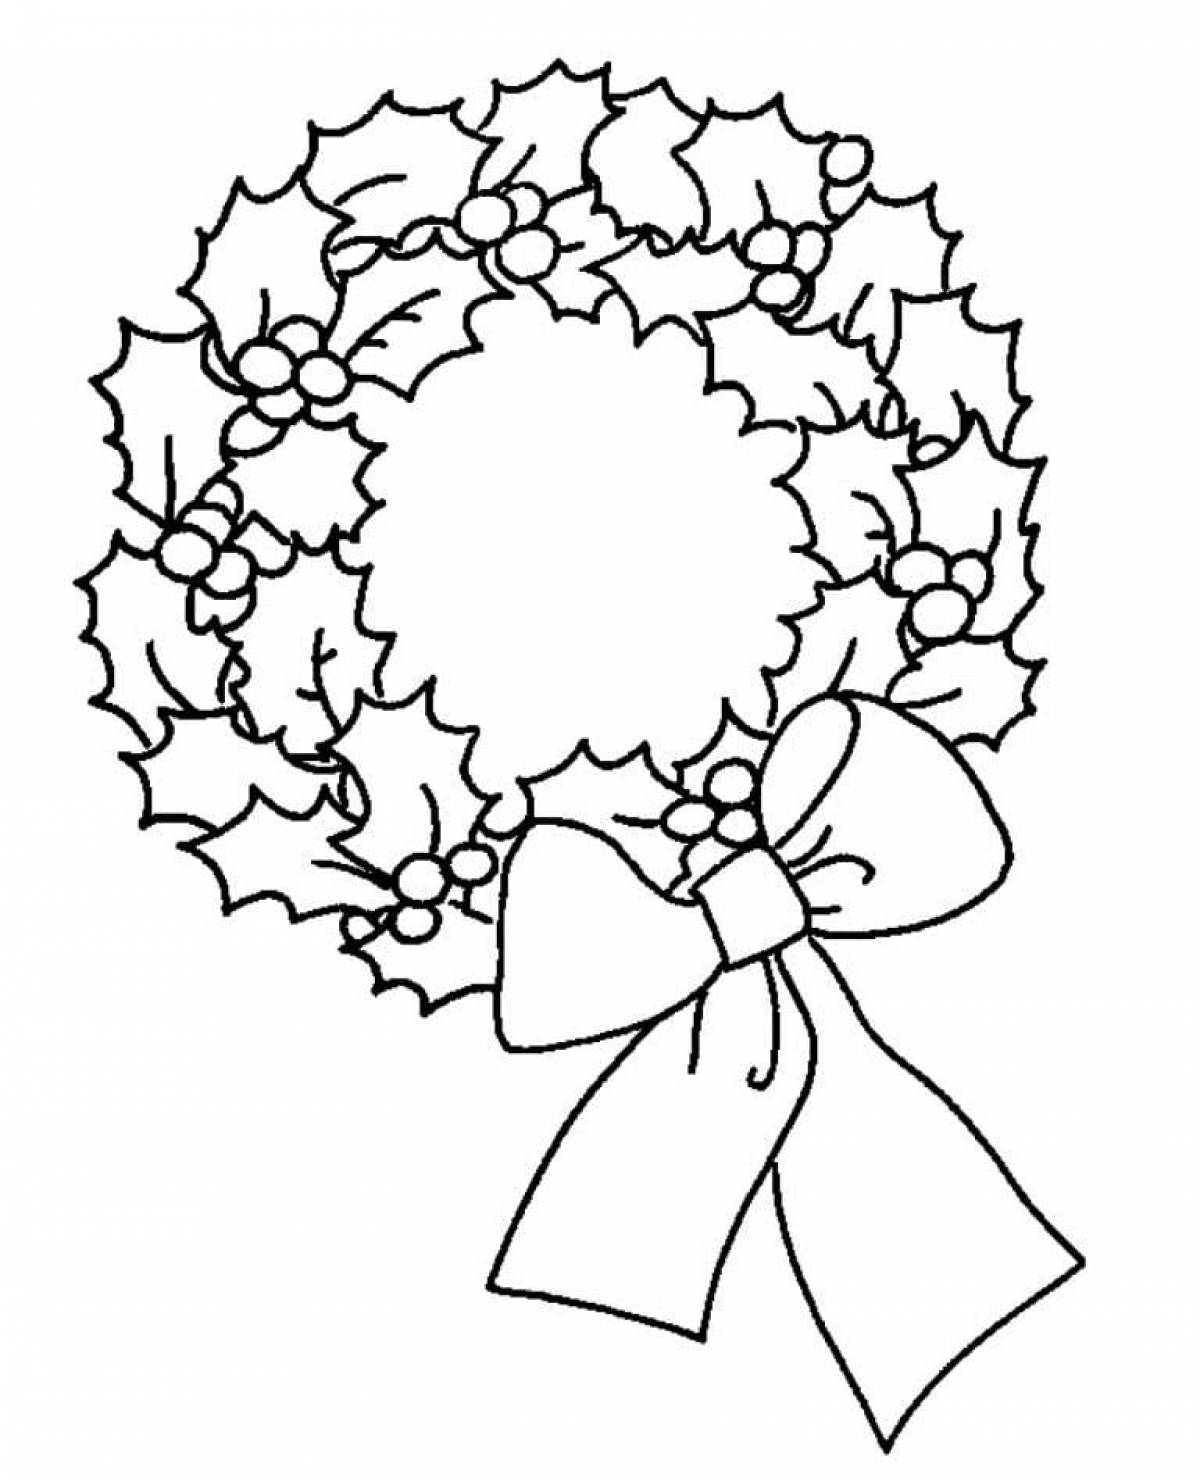 Coloring dynamic Christmas wreath